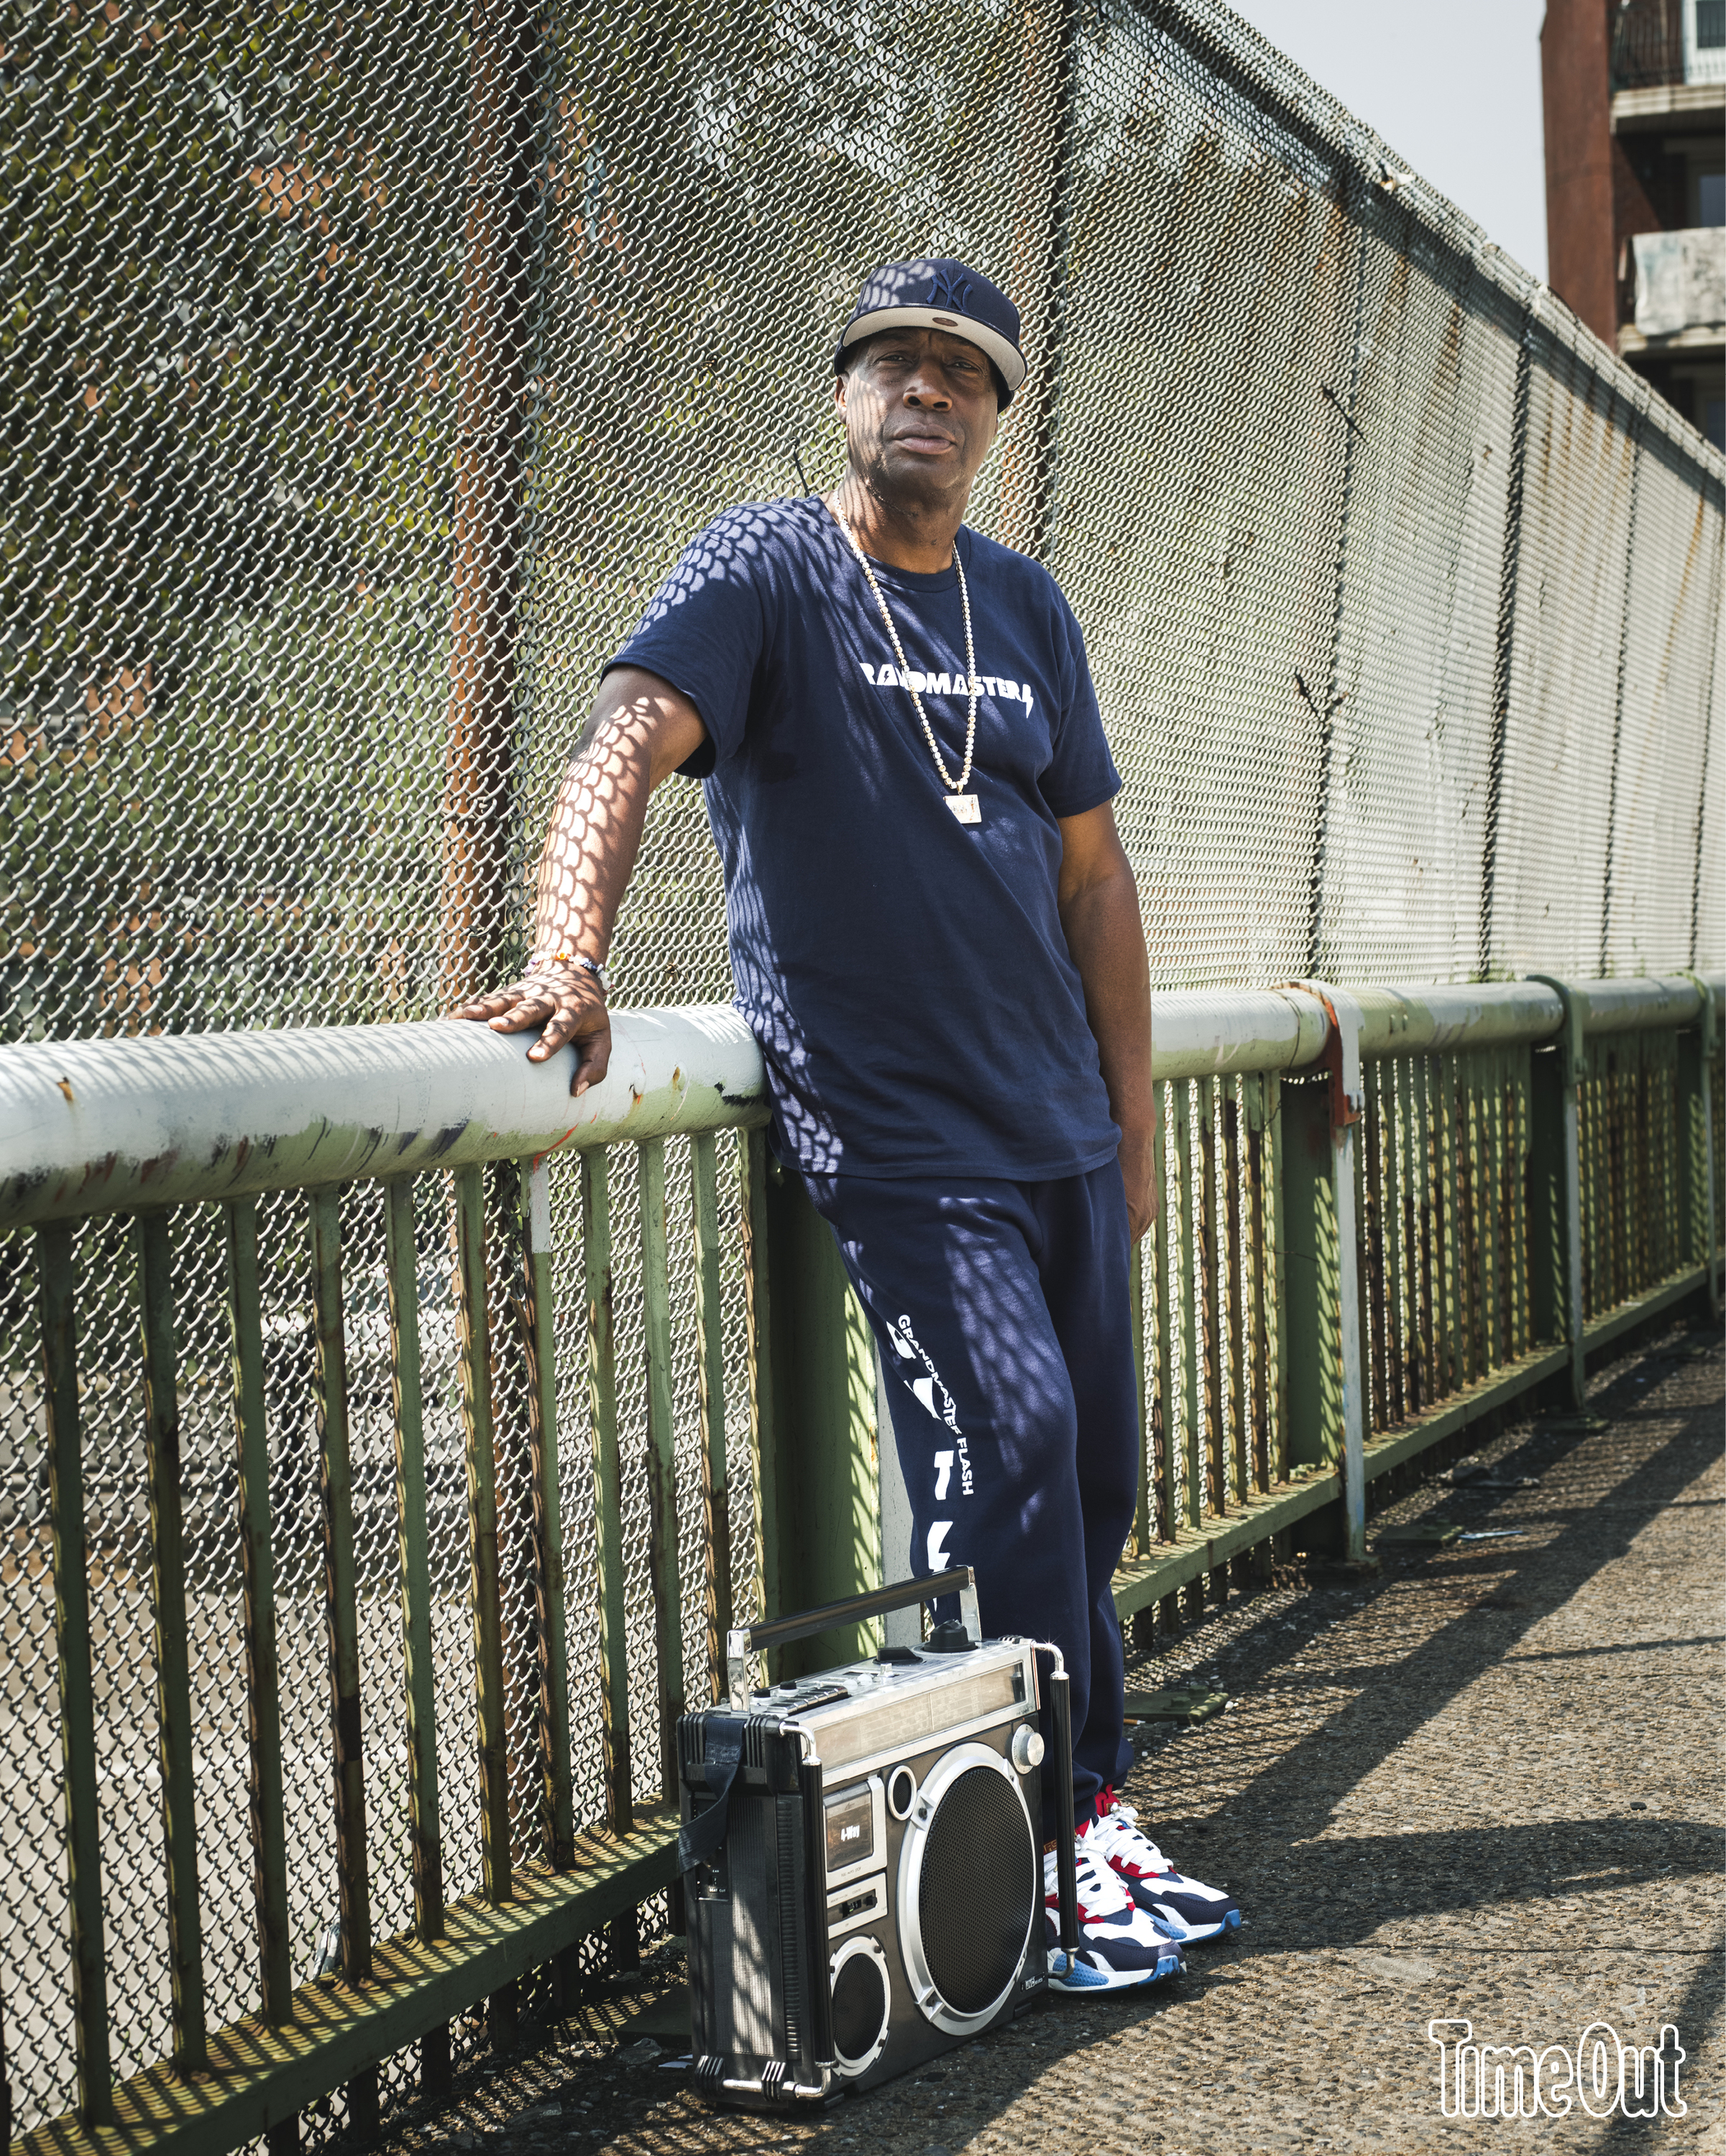 Grandmaster Flash returns to The Bronx's Crotona Park for a special concert  in honor of 50 years of hip-hop